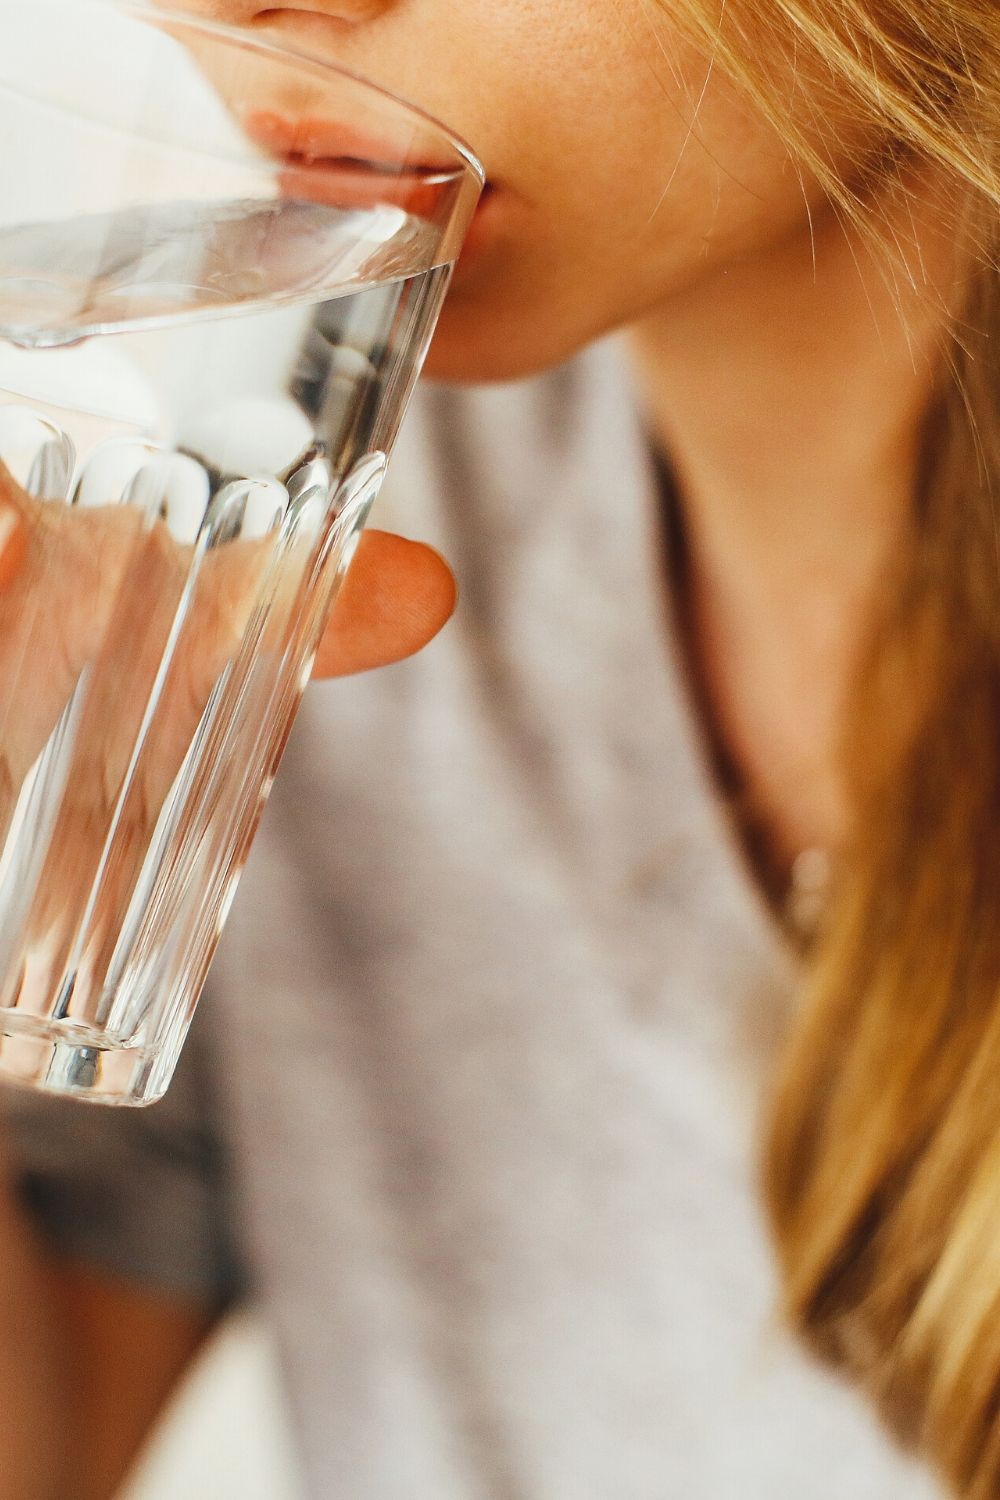 Can drinking water help clear up your skin